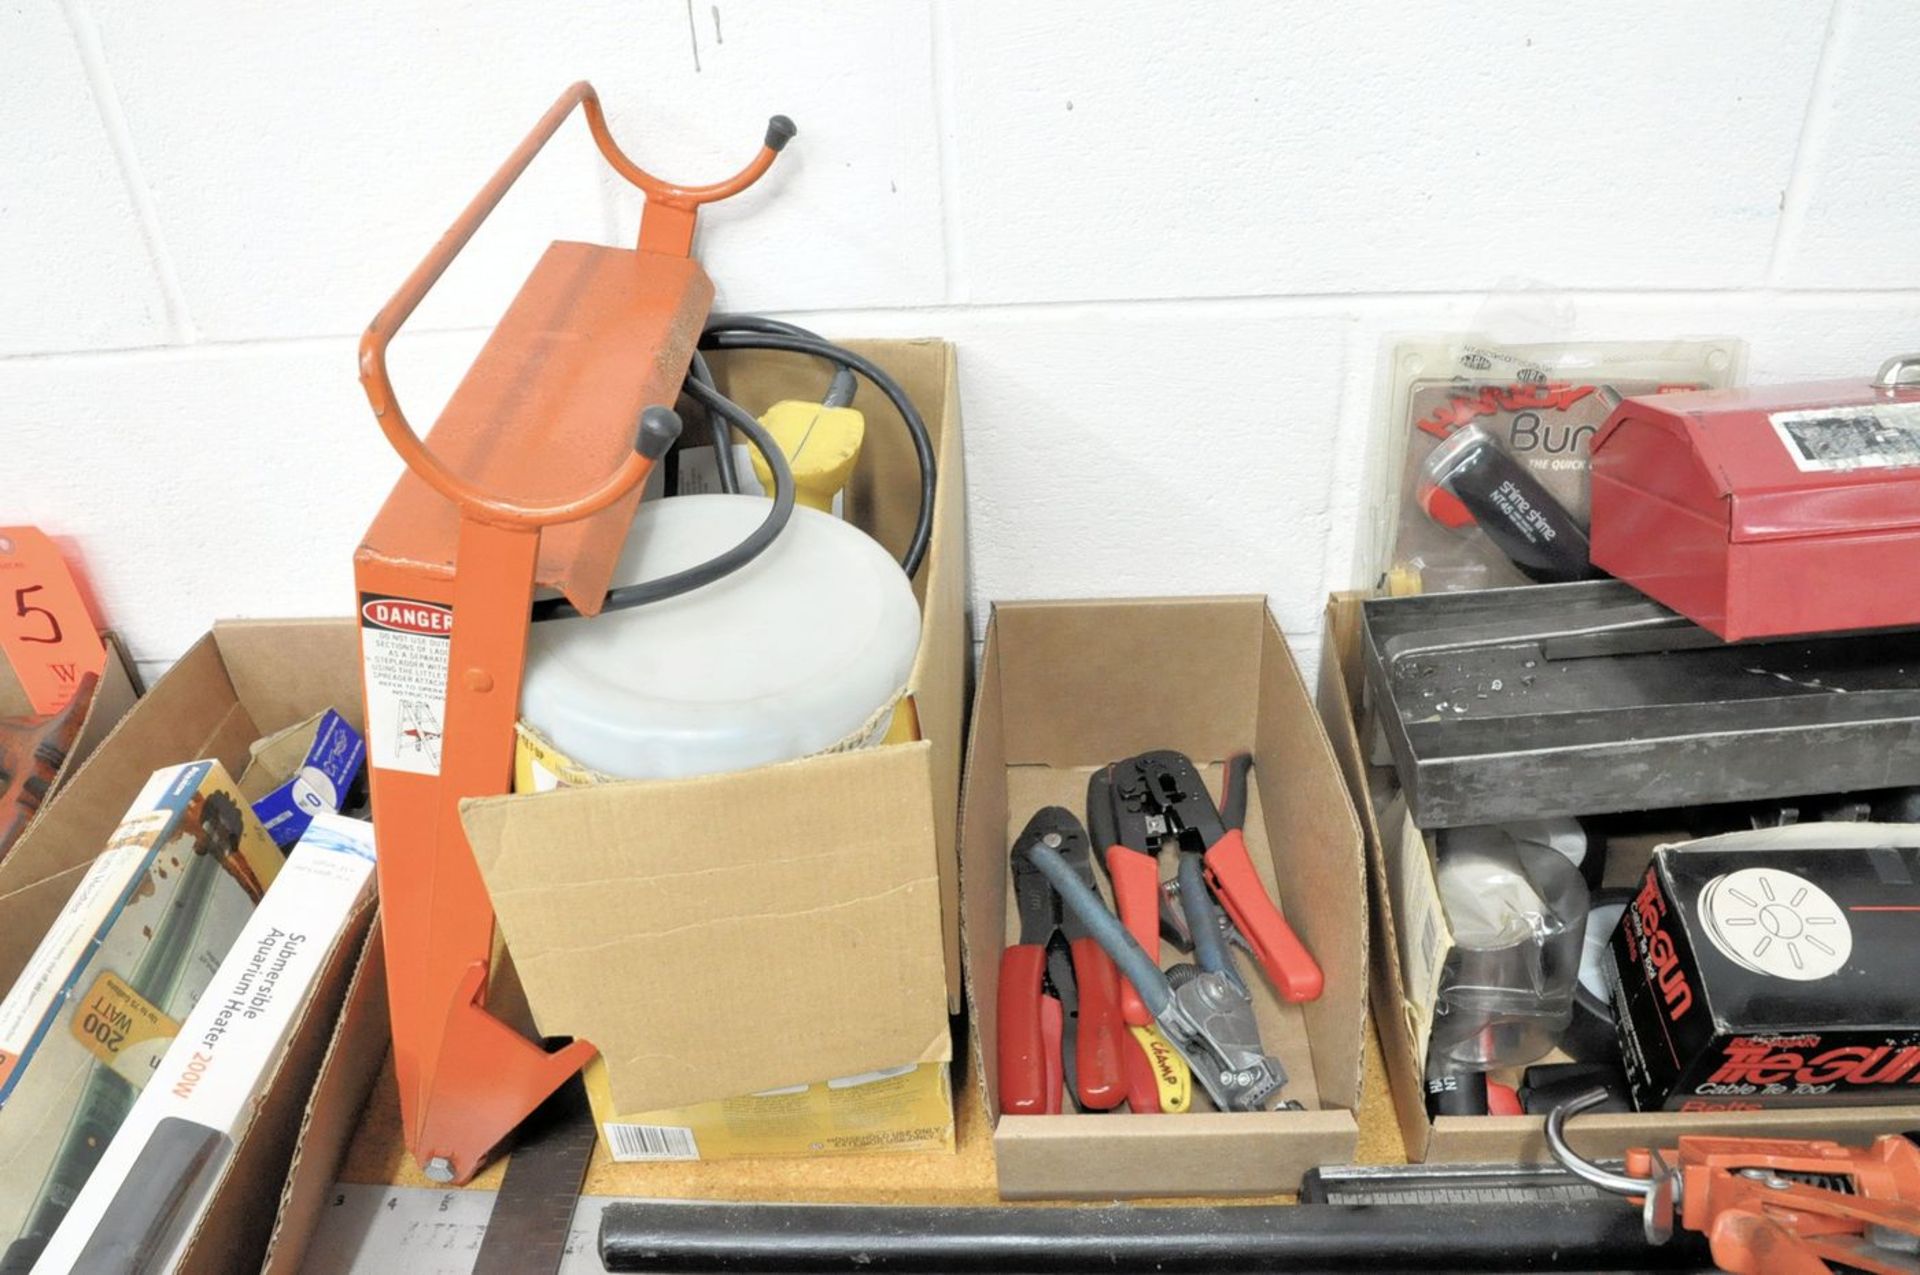 Lot - Brushes, Paint Tray, Paint Sprayer, Wire Strippers, Tape Measures, Utility Knives, - Image 6 of 10